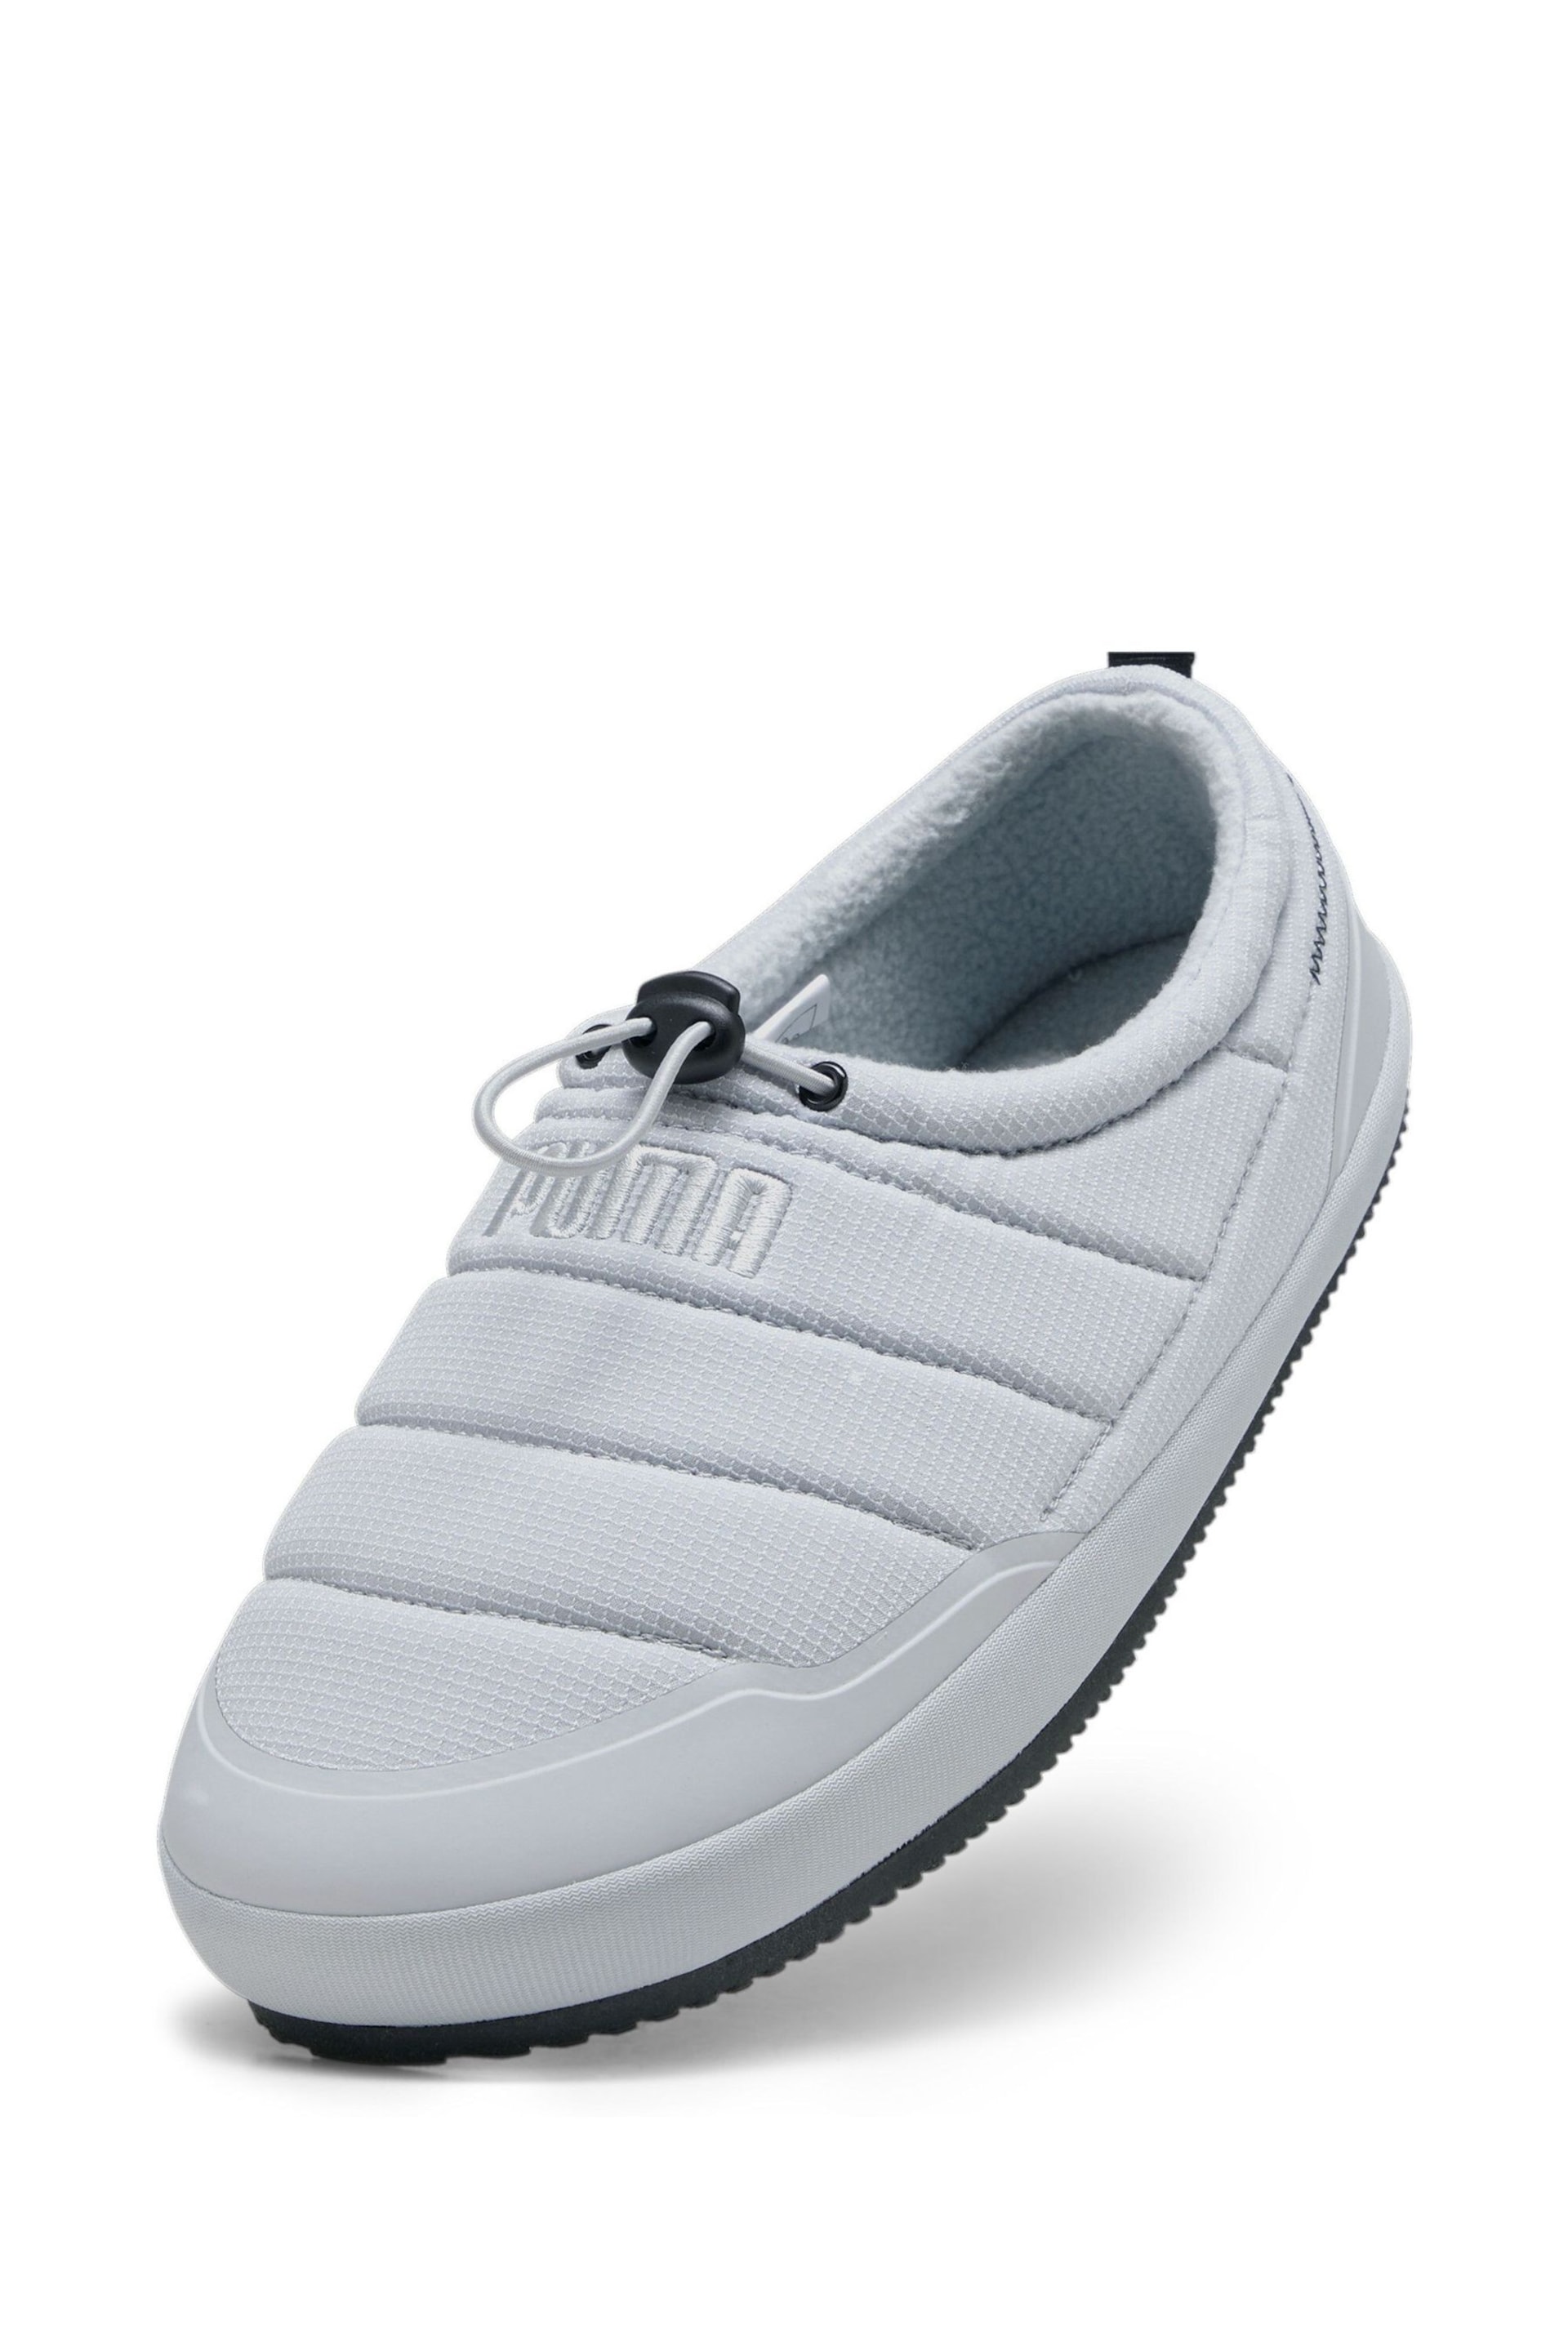 Puma Grey Plus Tuff Padded Over The Clouds Shoes - Image 5 of 8